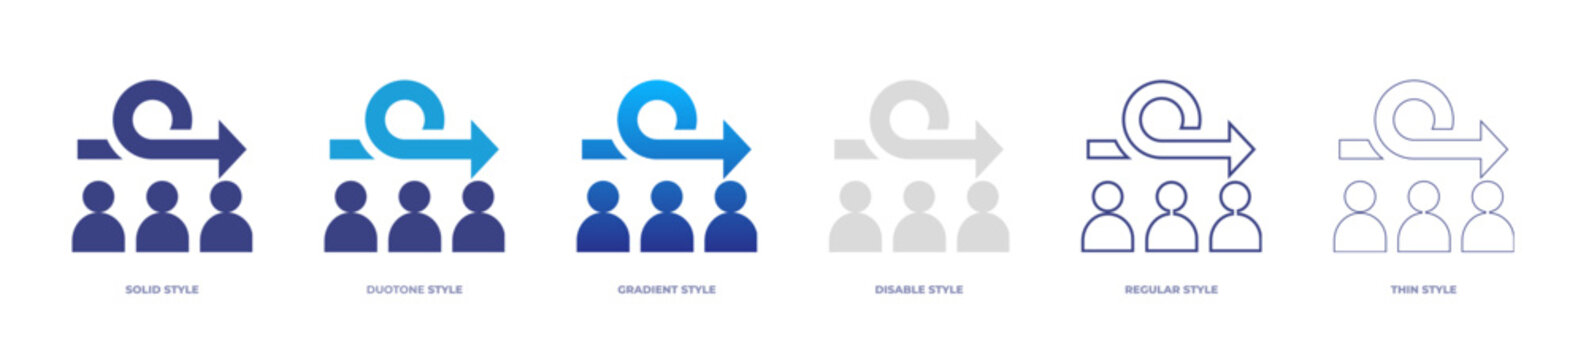 Agile icon set full style. Solid, disable, gradient, duotone, regular, thin. Vector illustration and transparent icon.